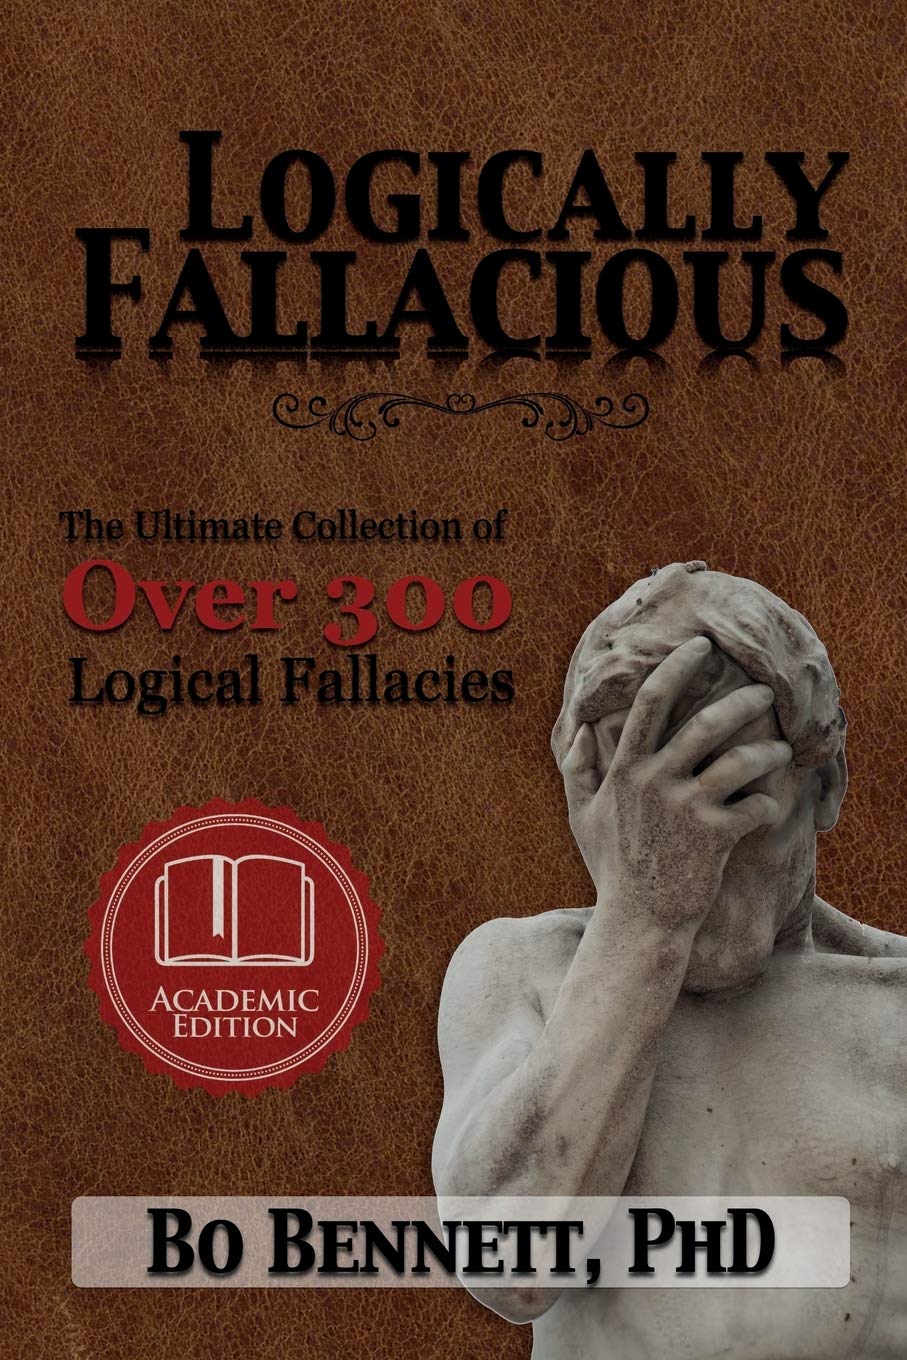 Logically Fallacious: The Ultimate Collection of Over 300 Logical Fallacies - Academic Edition